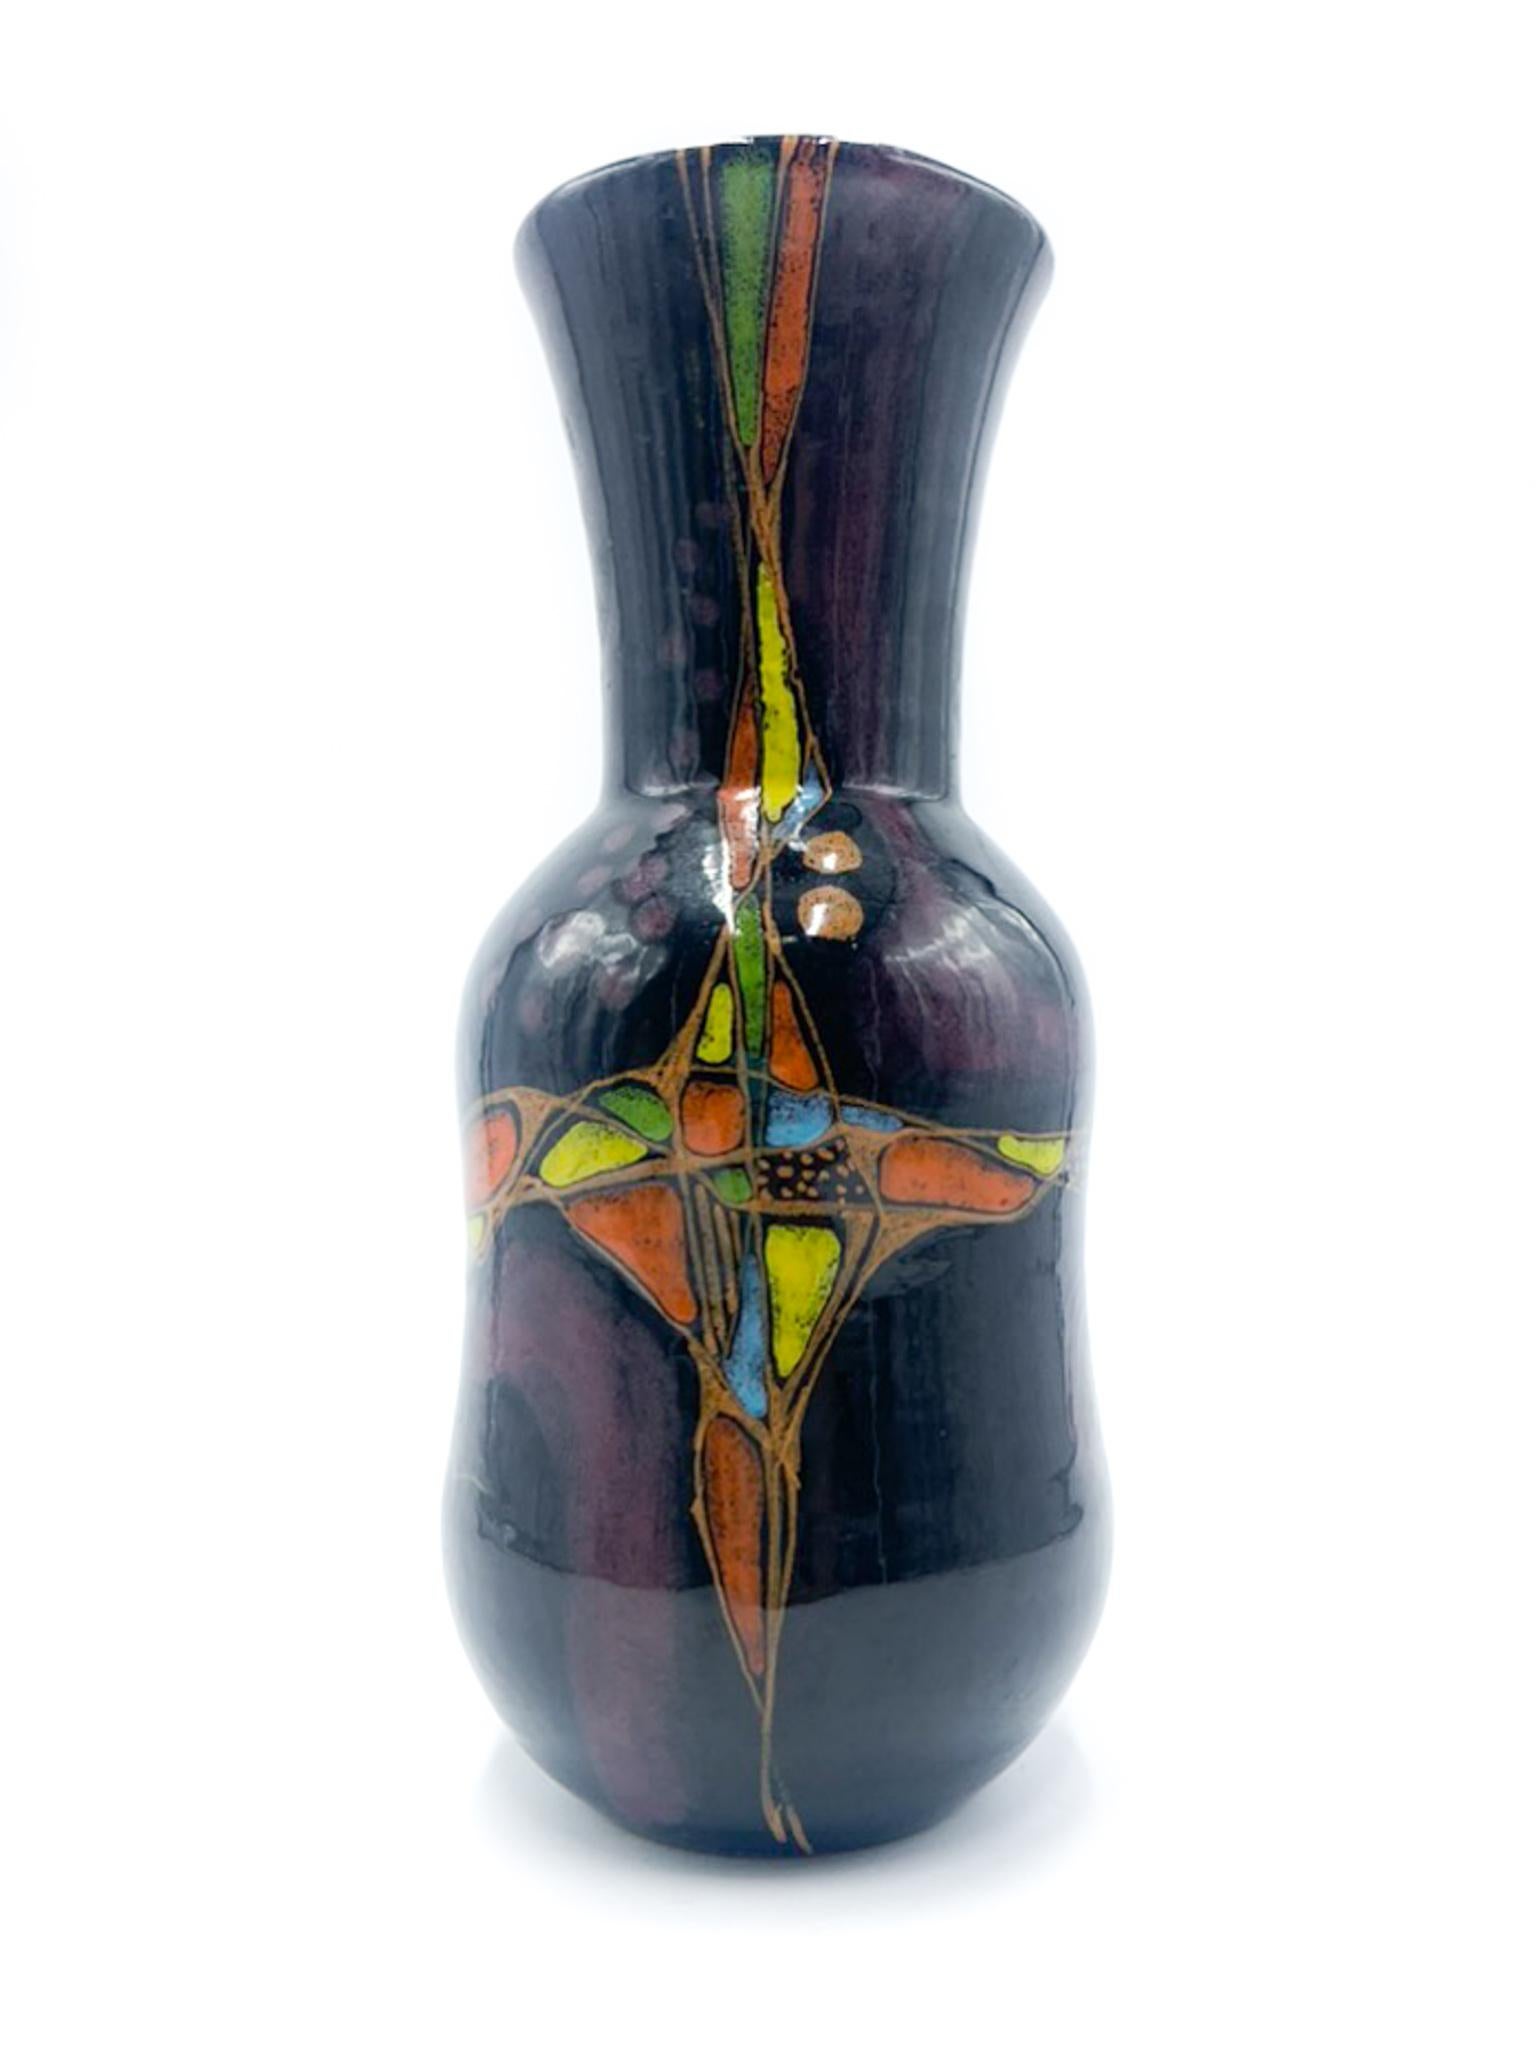 Purple ceramic vase with colored decorations, made by Verzolini in the 70s

Measures: Ø cm 12 h cm 25.